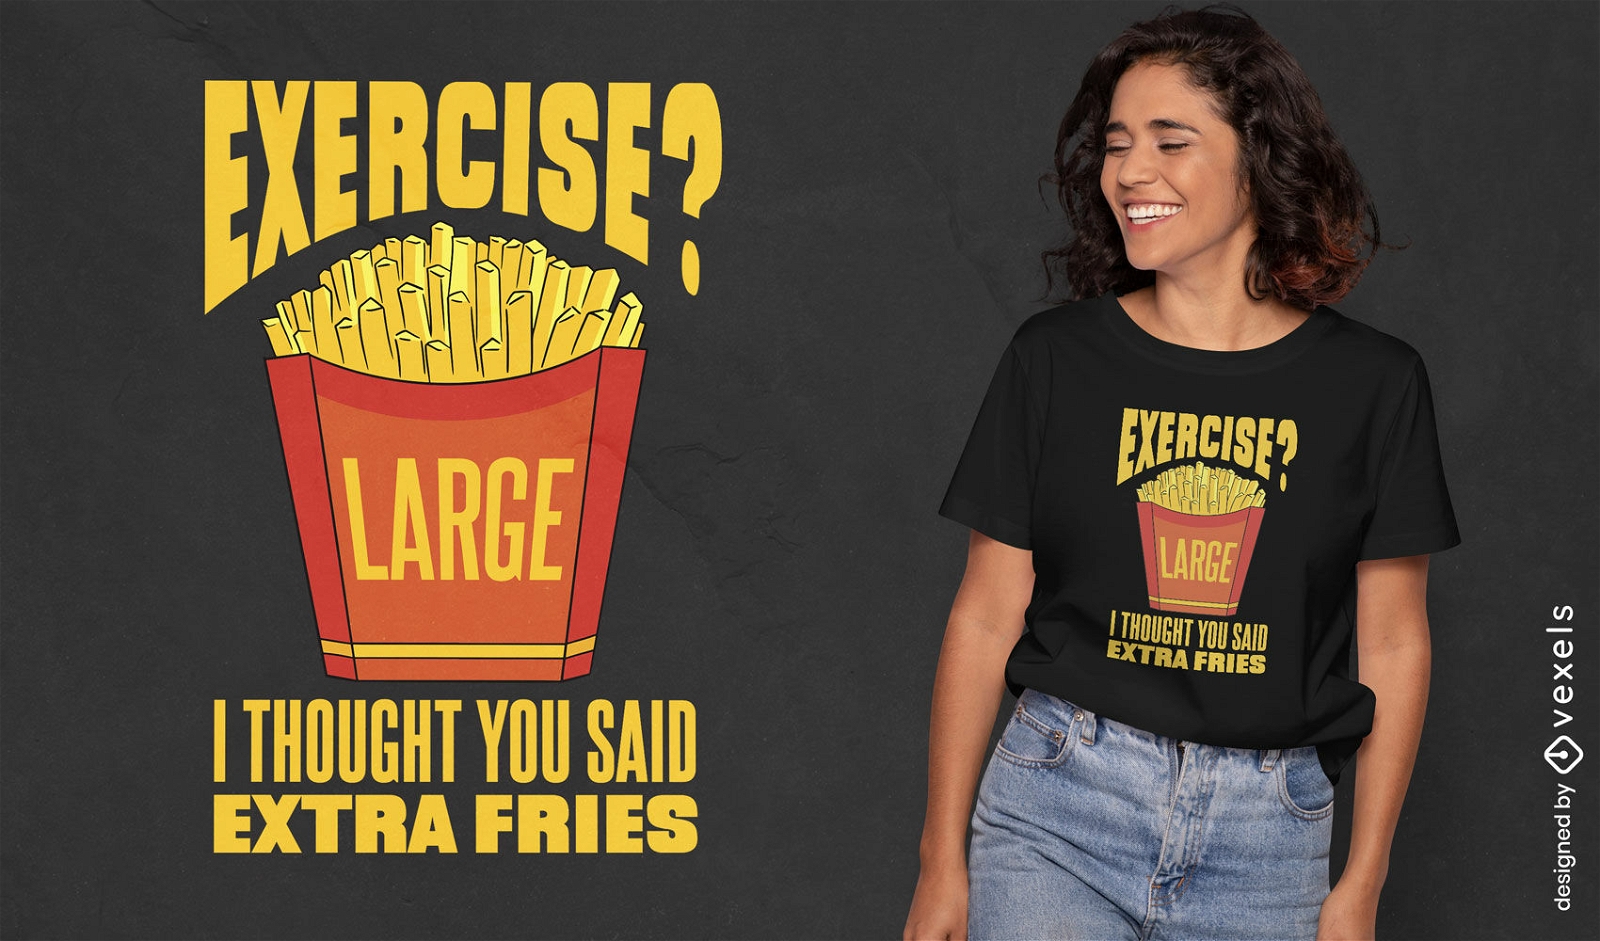 Large french fries t-shirt design